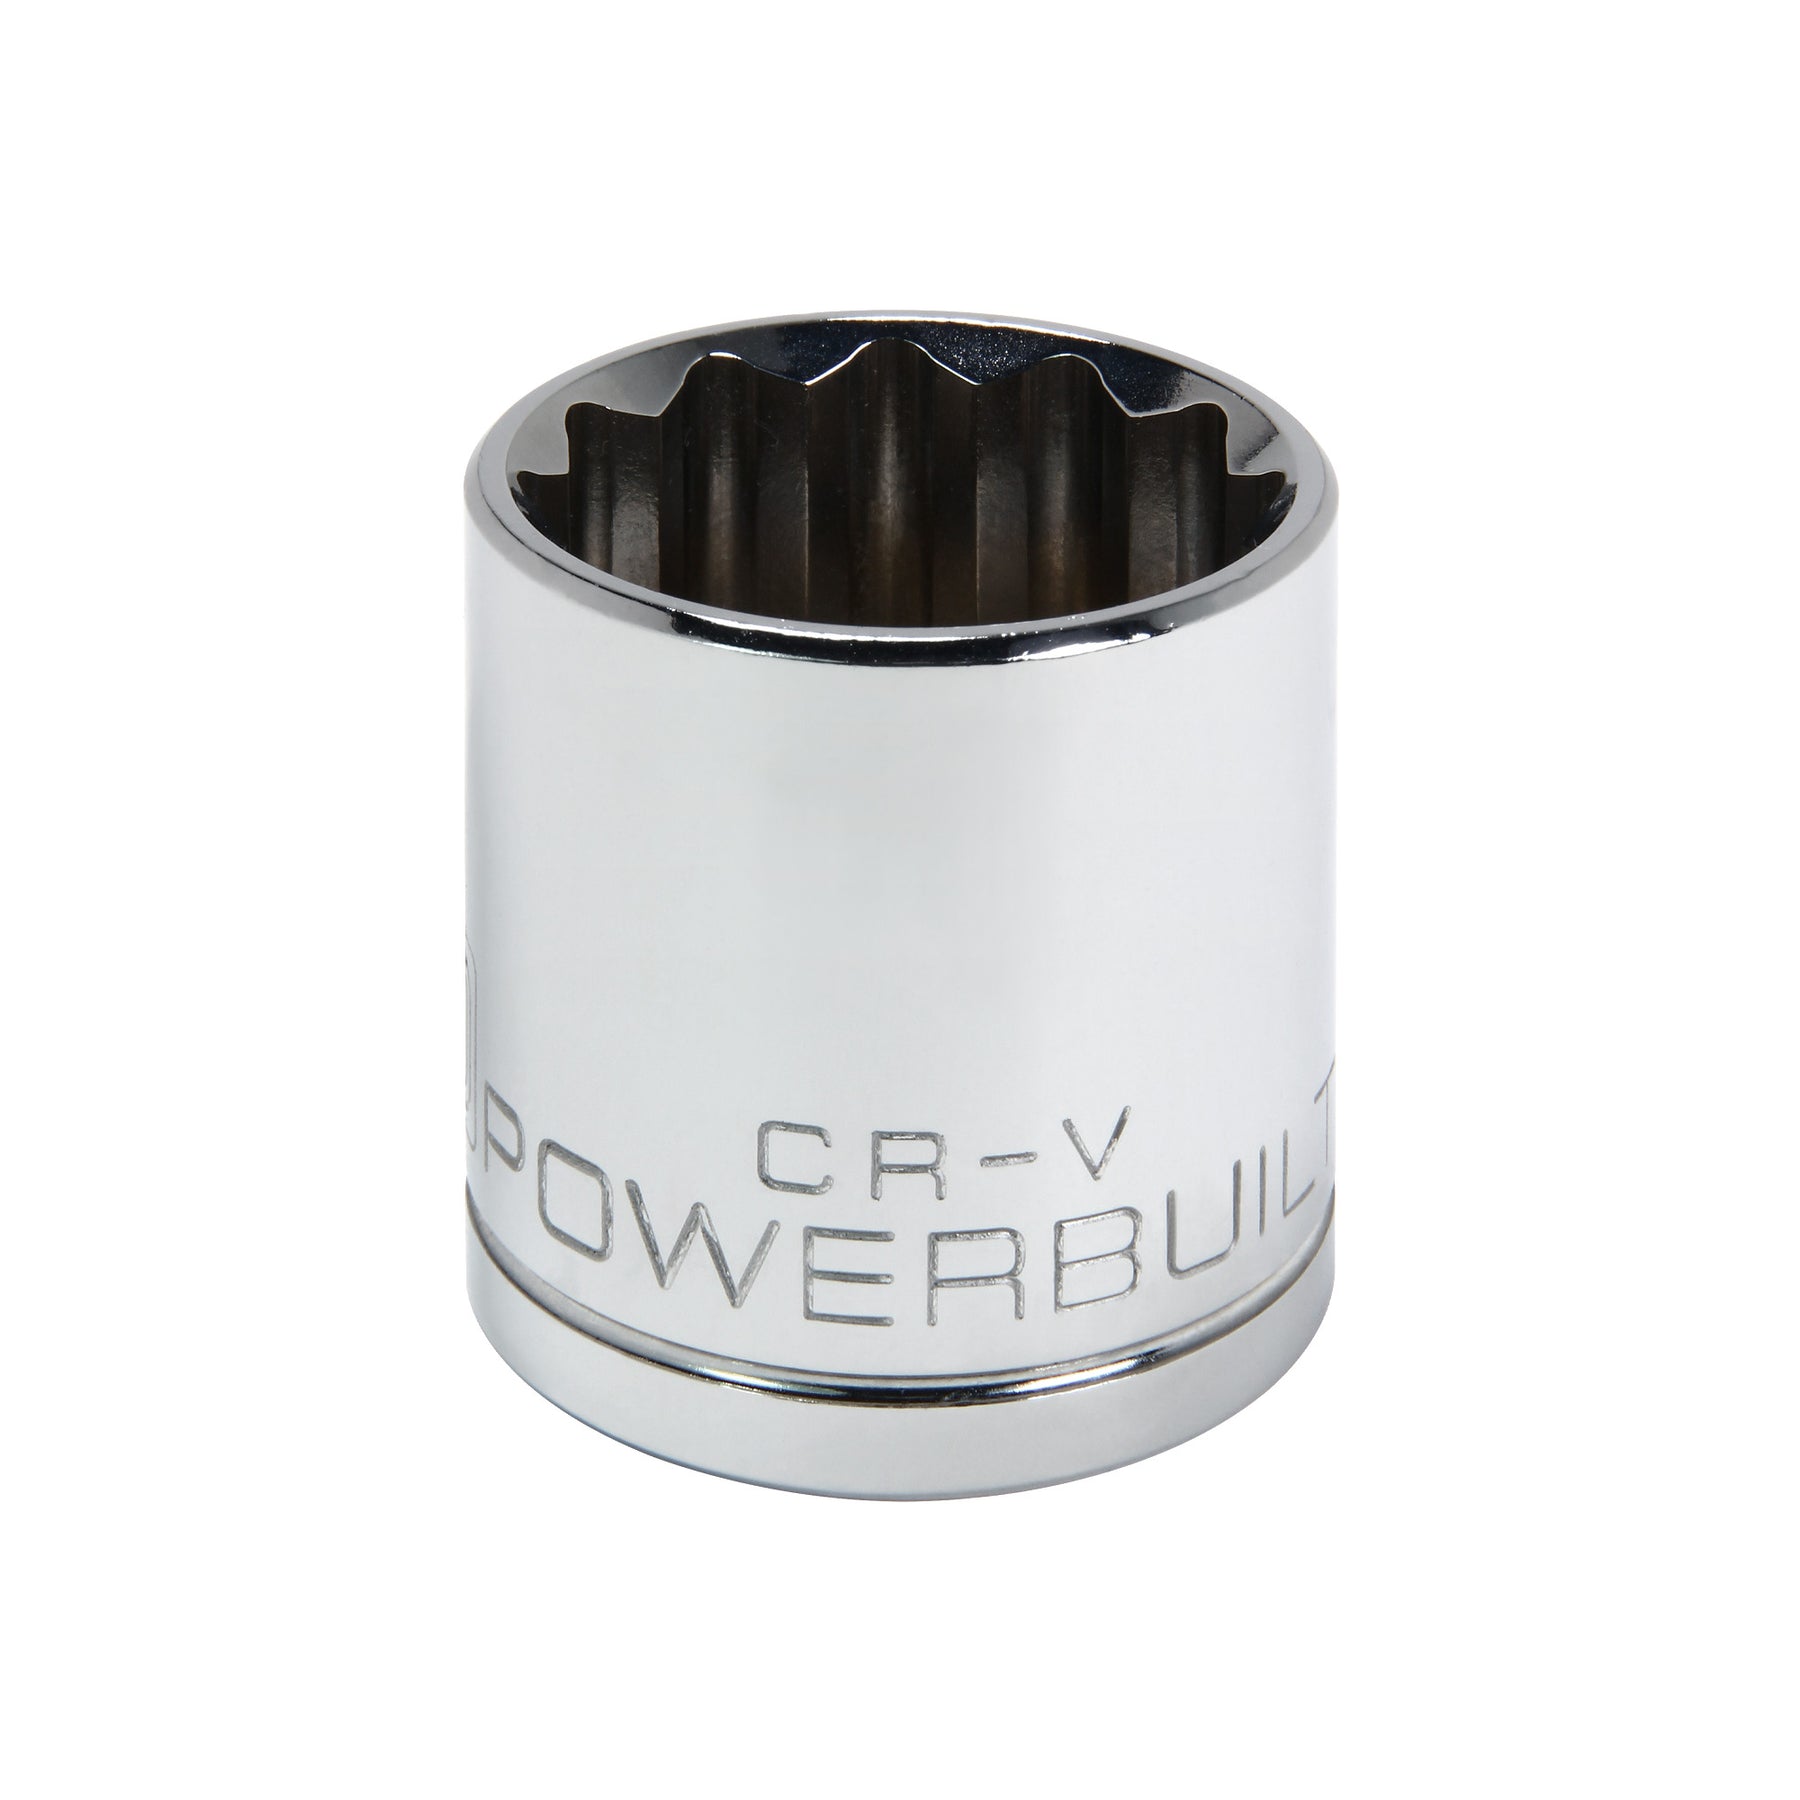 1/2 Inch Drive x 1-3/16 Inch 12 Point Shallow Socket